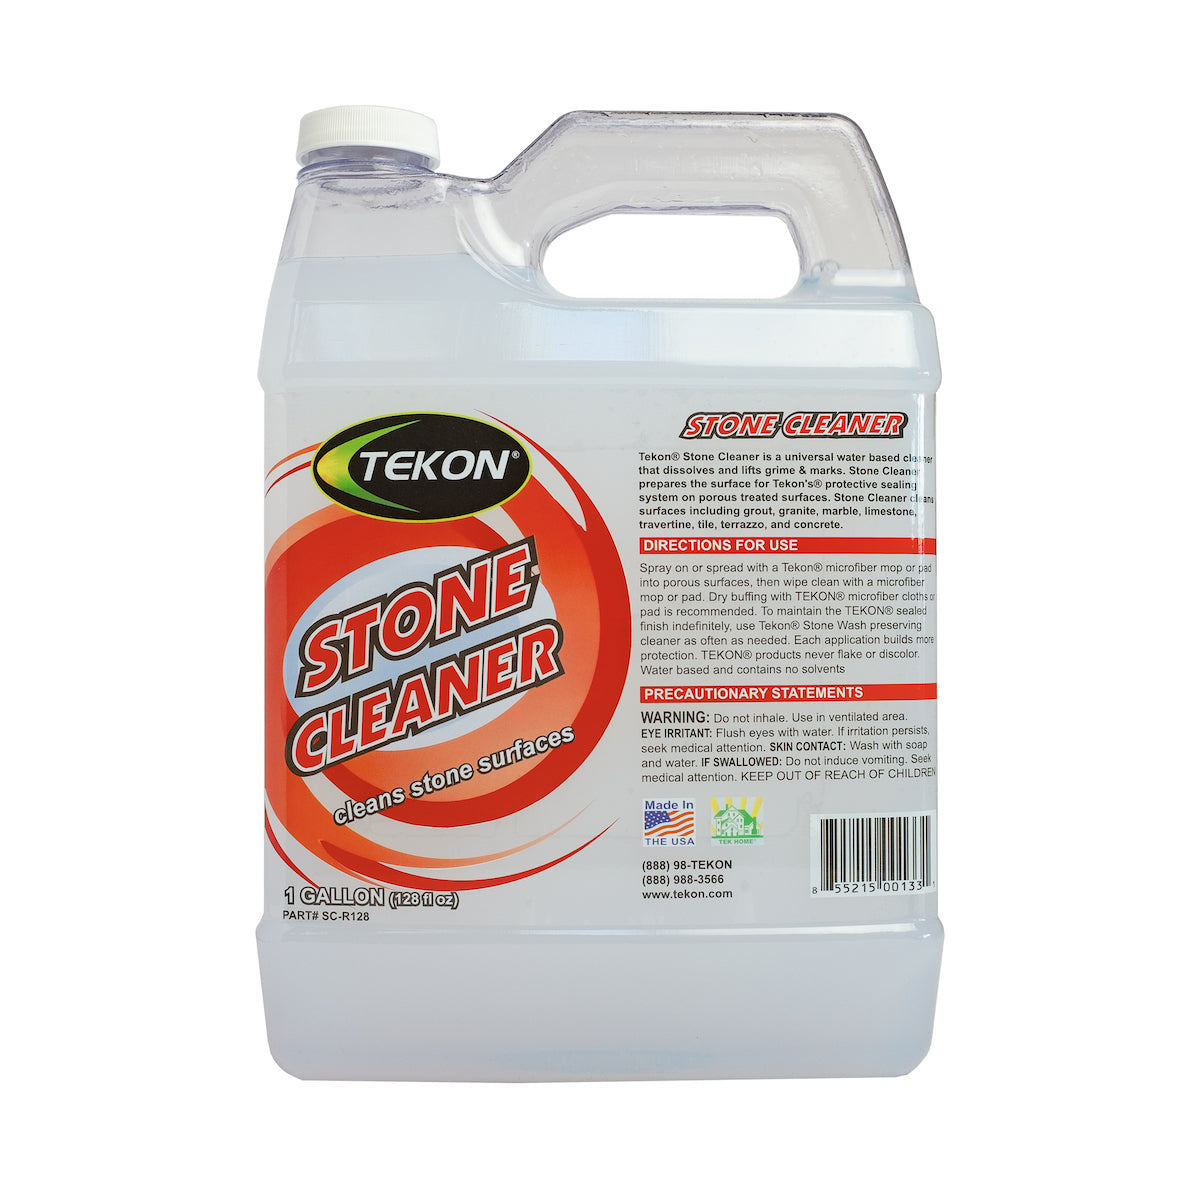 Stone Cleaner - Tile, Grout, and Stone Cleaner